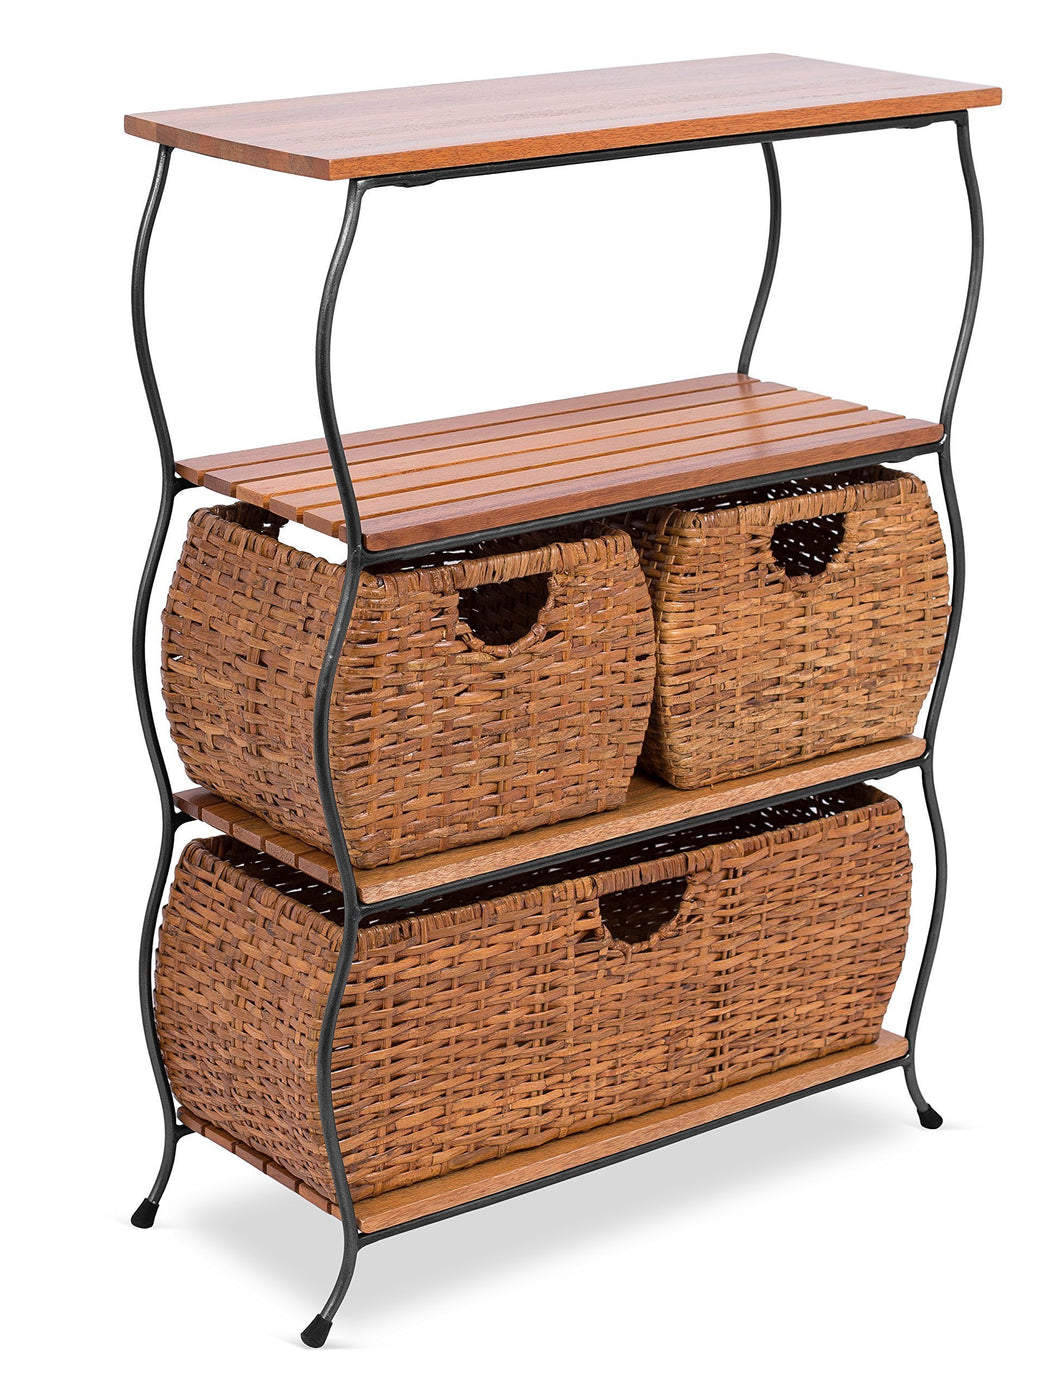 The best birdrock home industrial 4 tier shelving unit with rattan woven baskets delivered fully assembled wooden freestanding shelves with storage bins decorative living room shelf